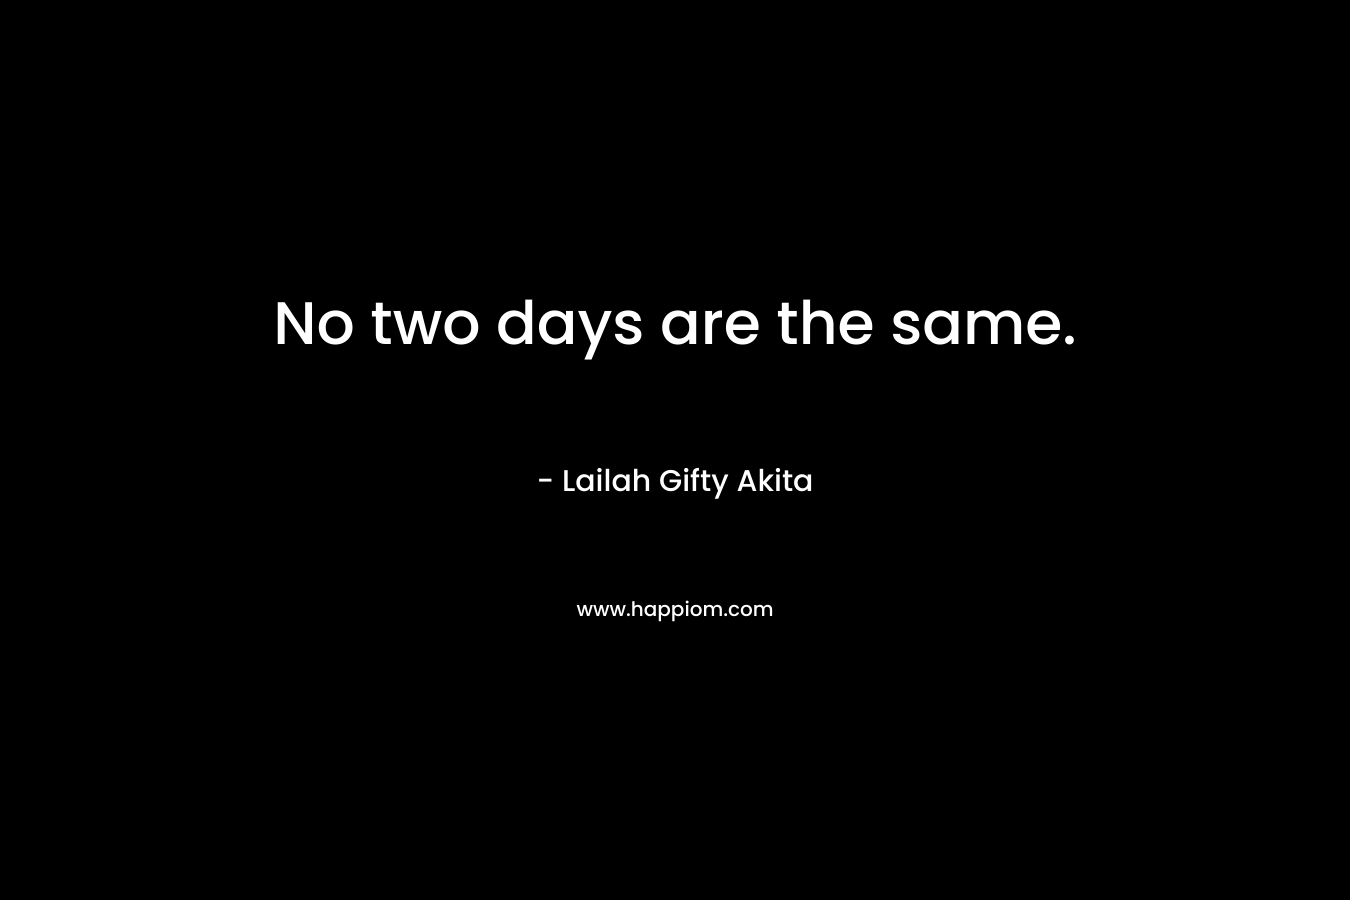 No two days are the same.